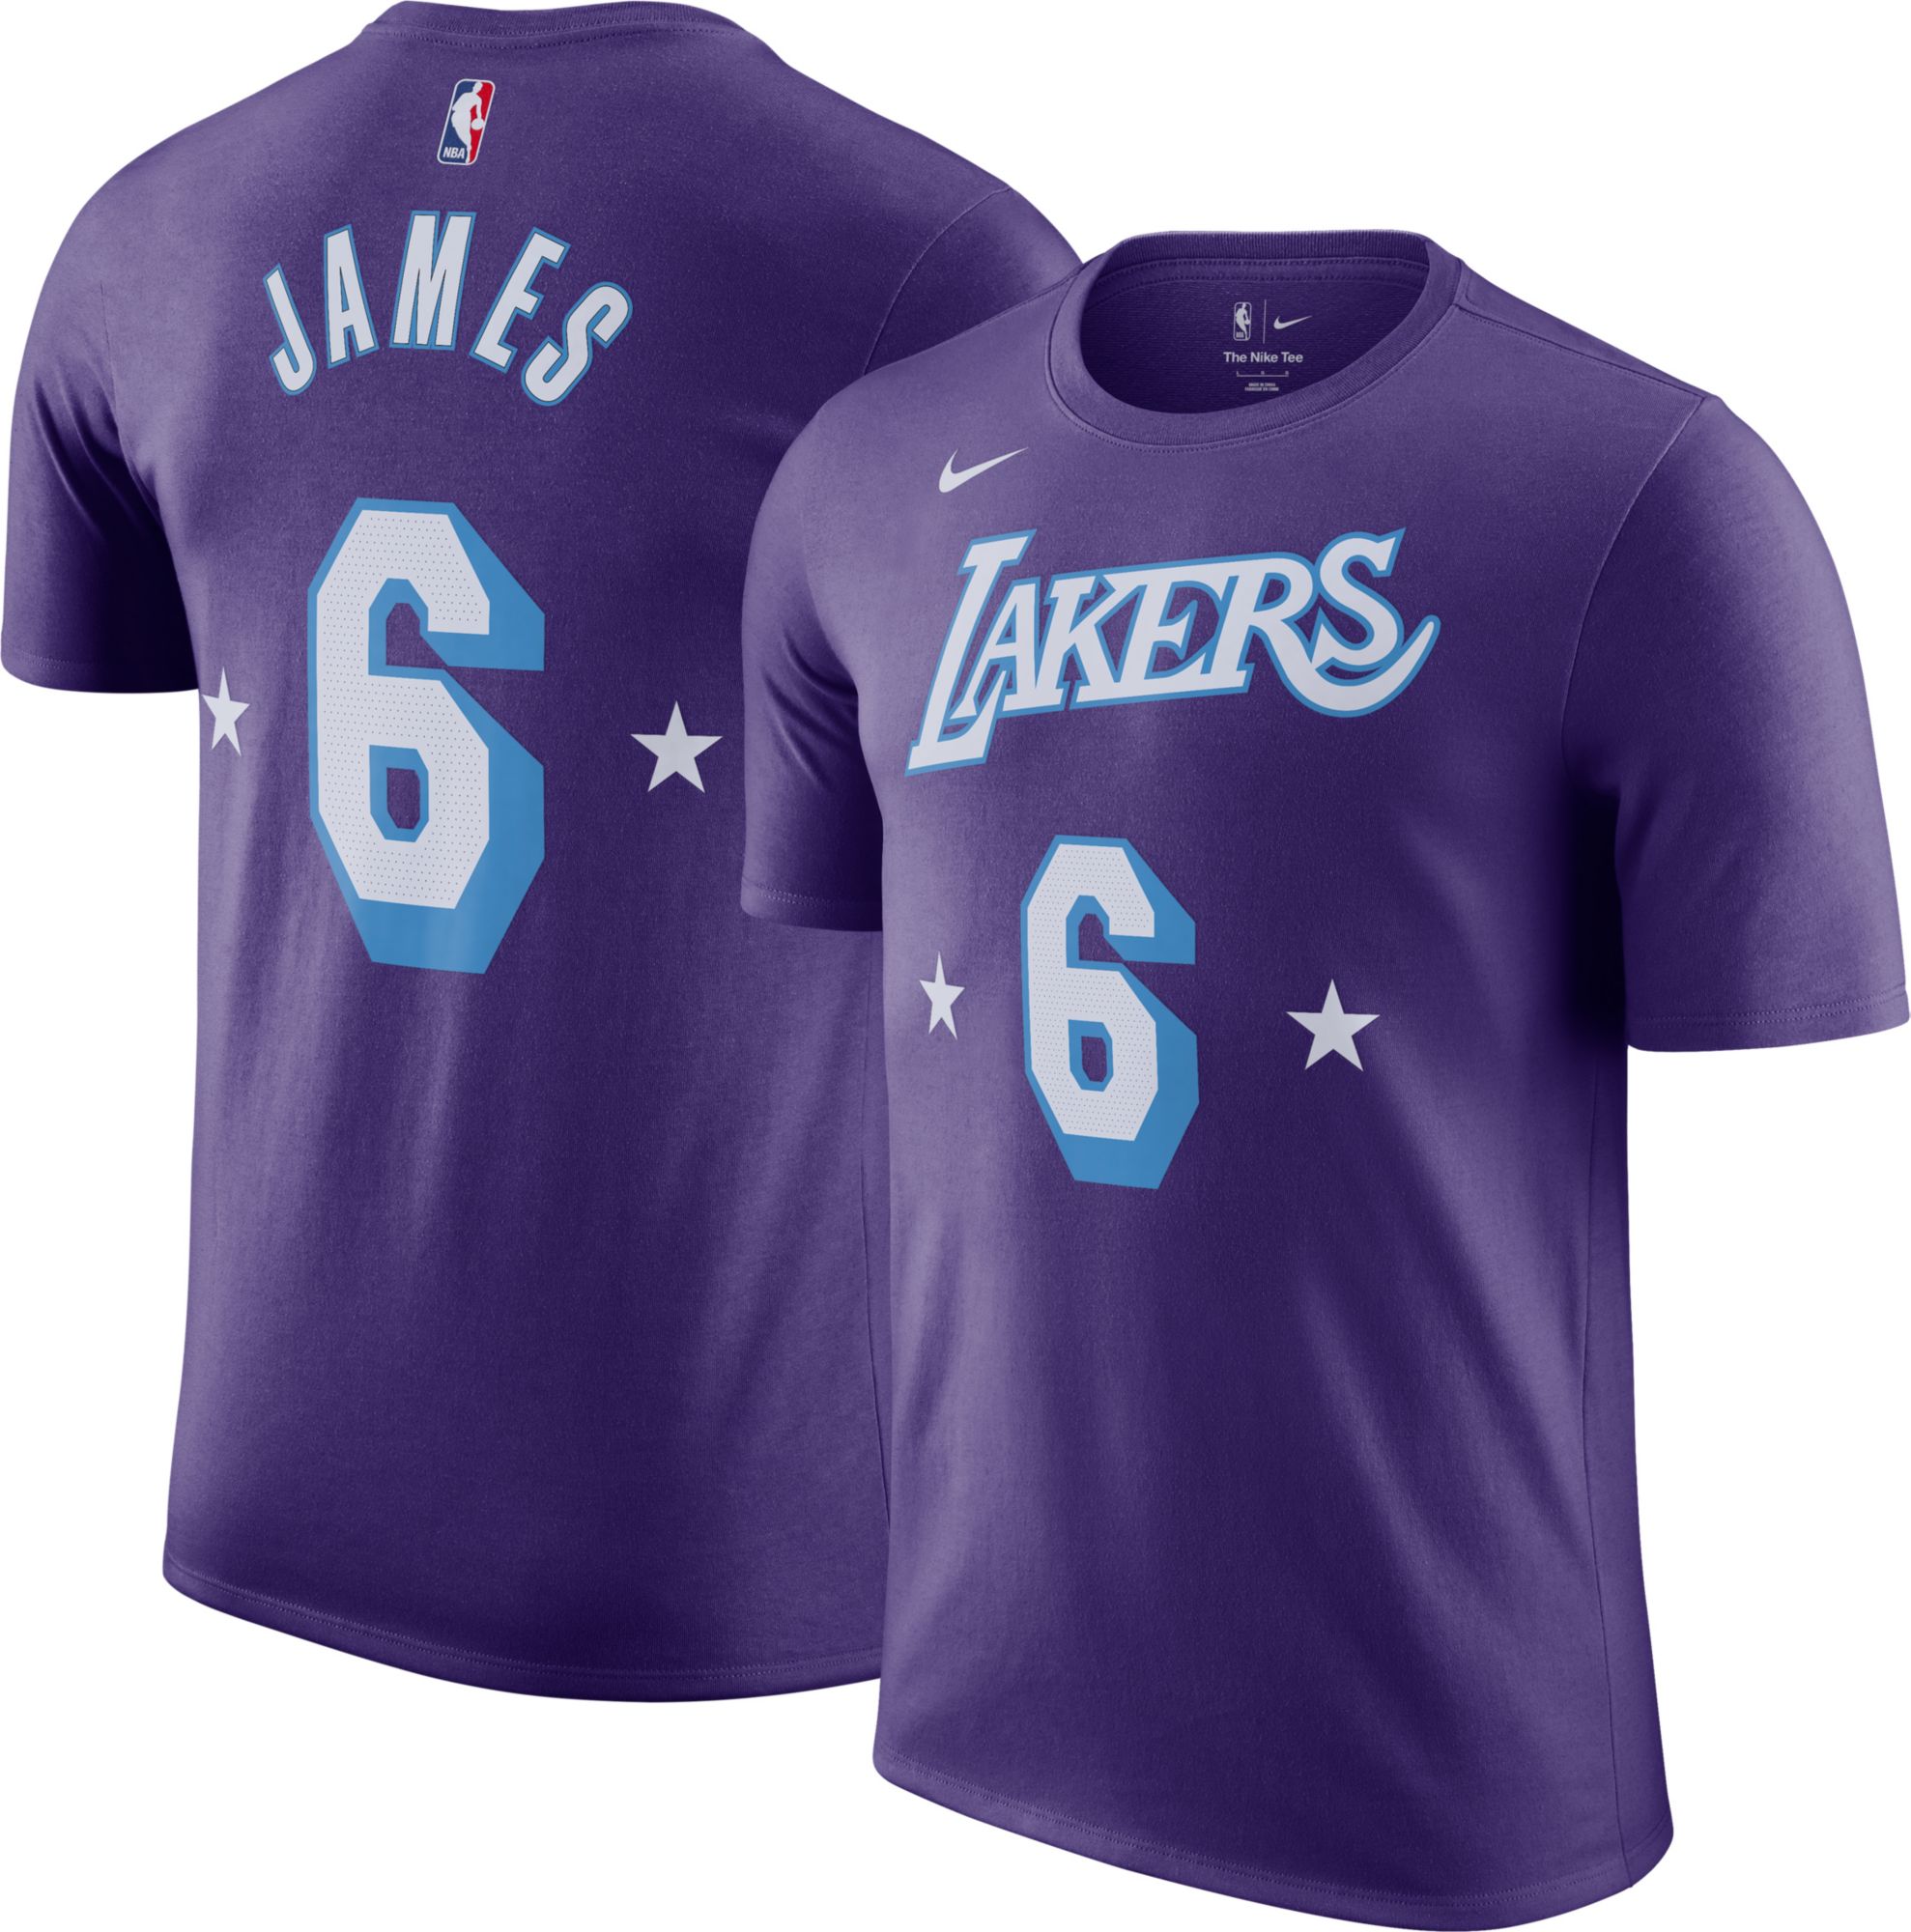 lakers 2021 jersey